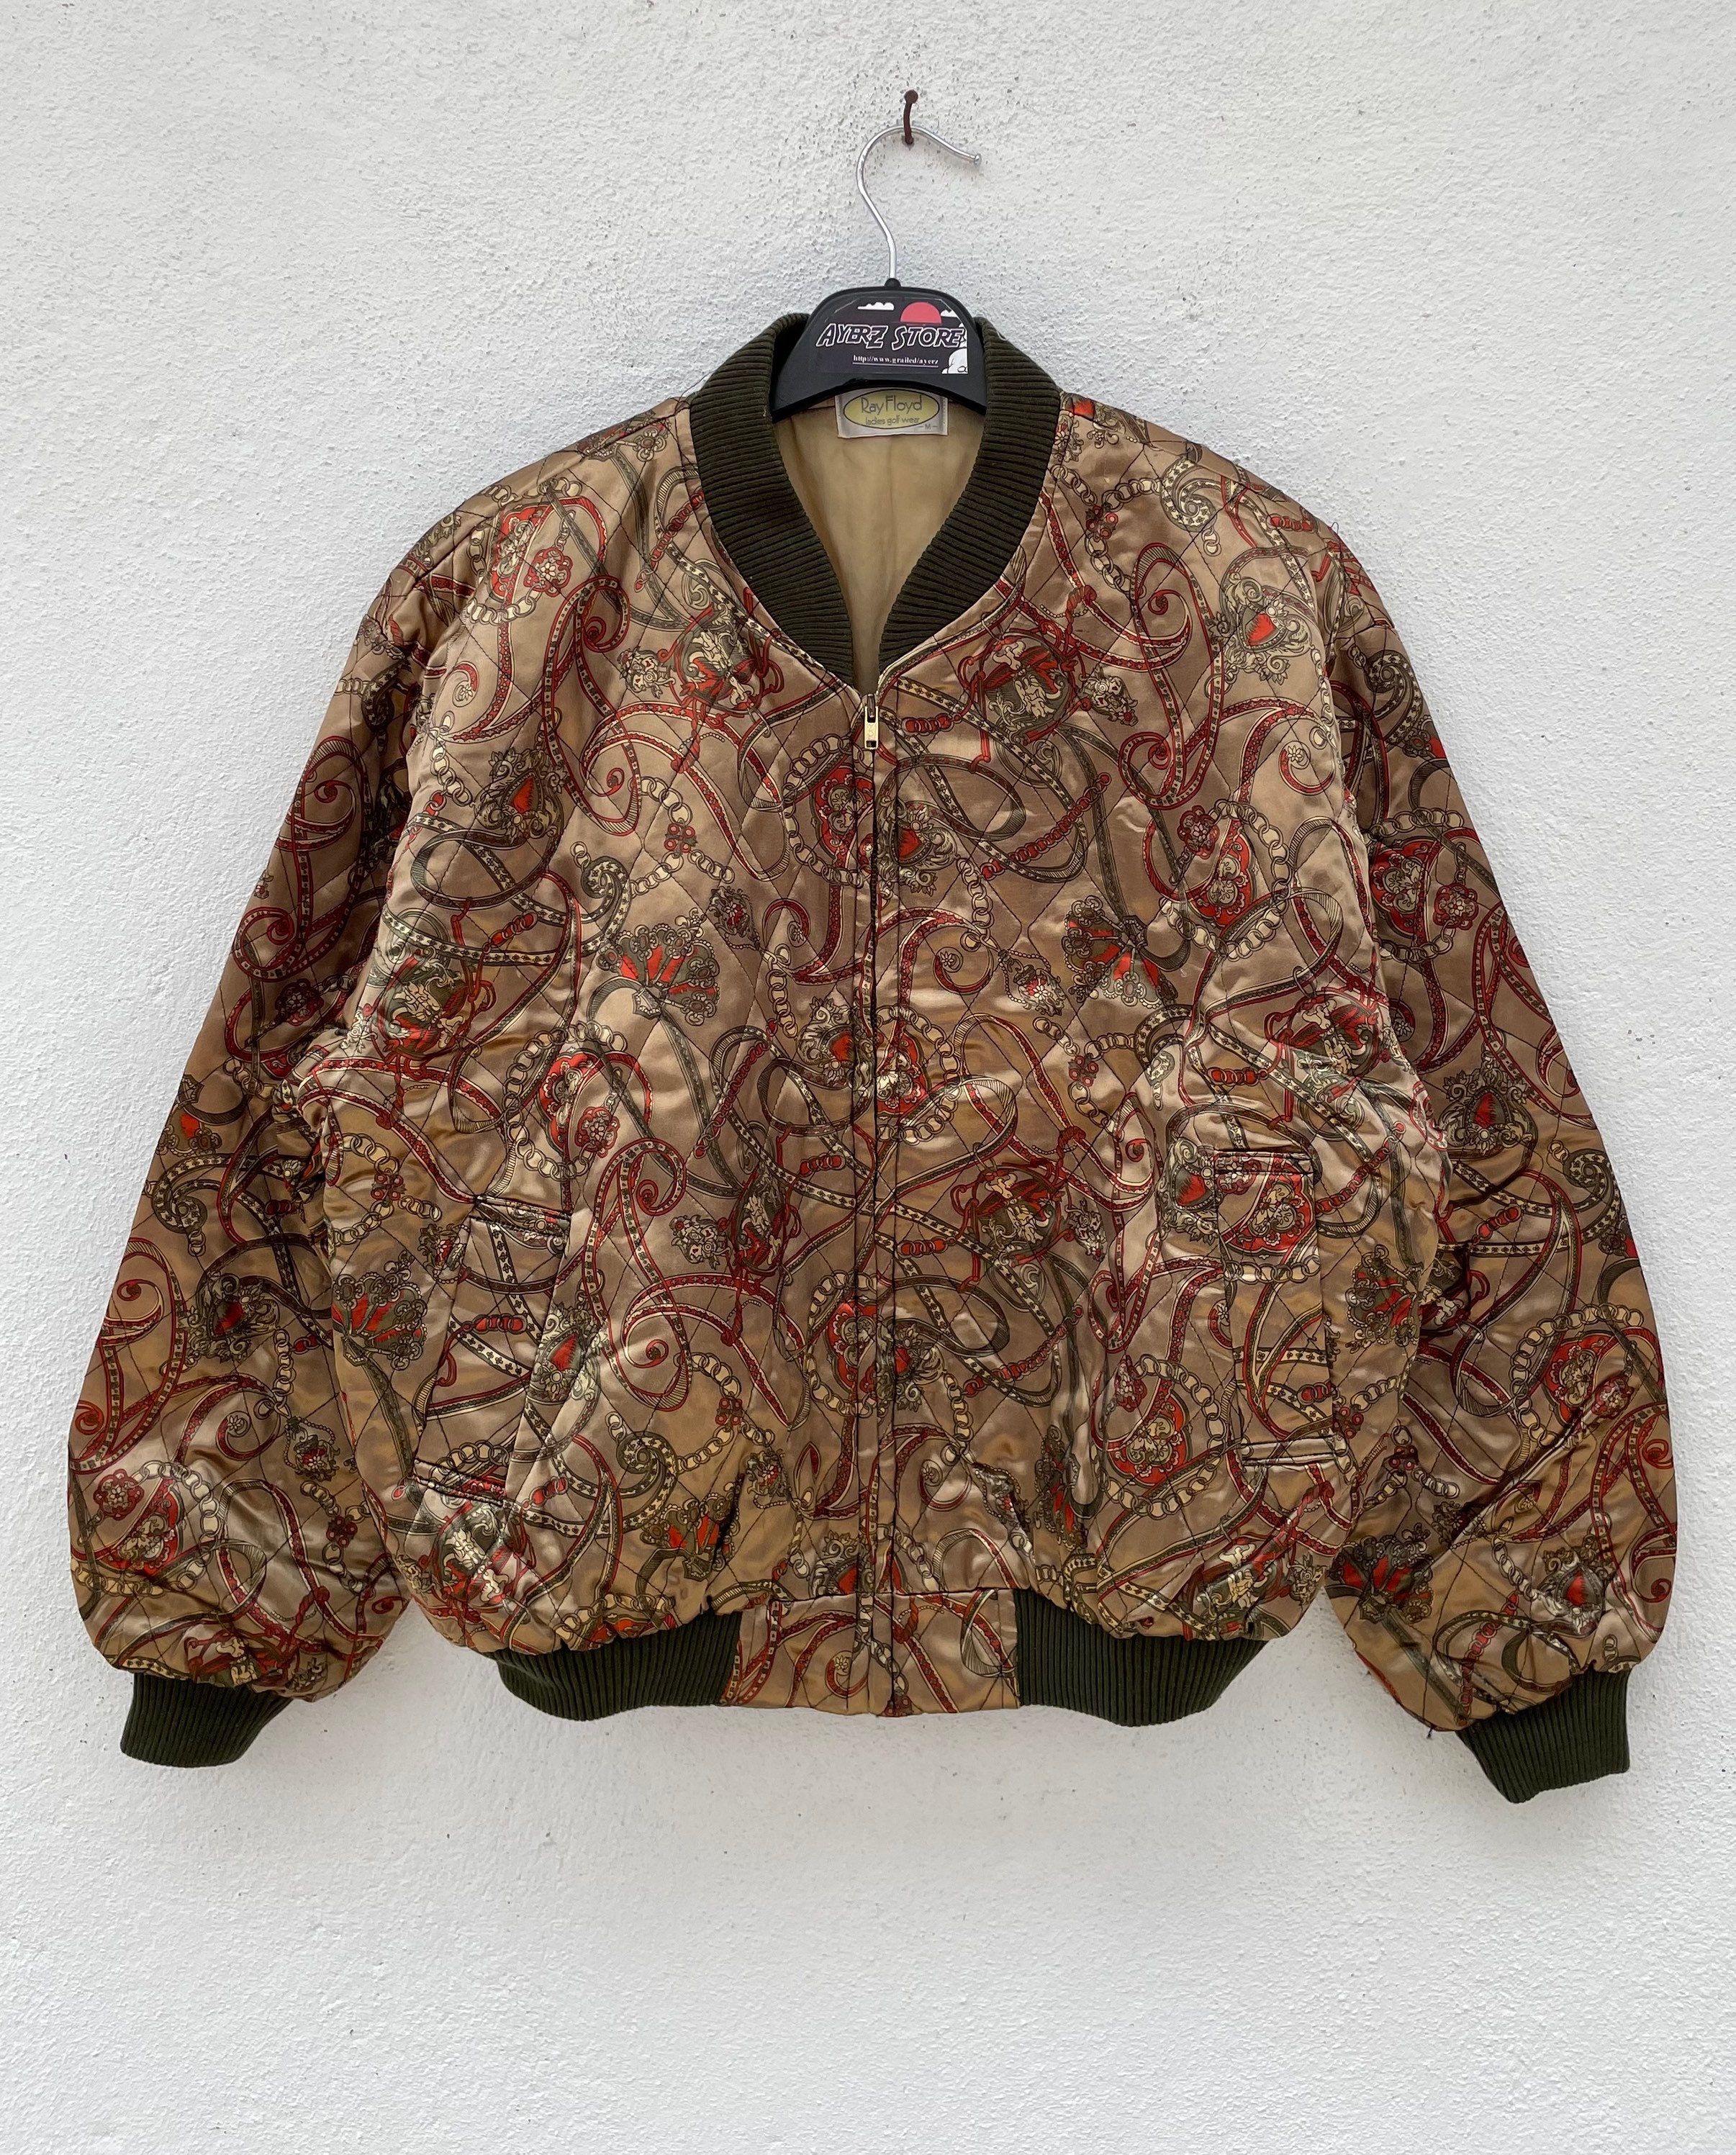 LV fleece track jacket handmade recycled faux fur bomber in brown